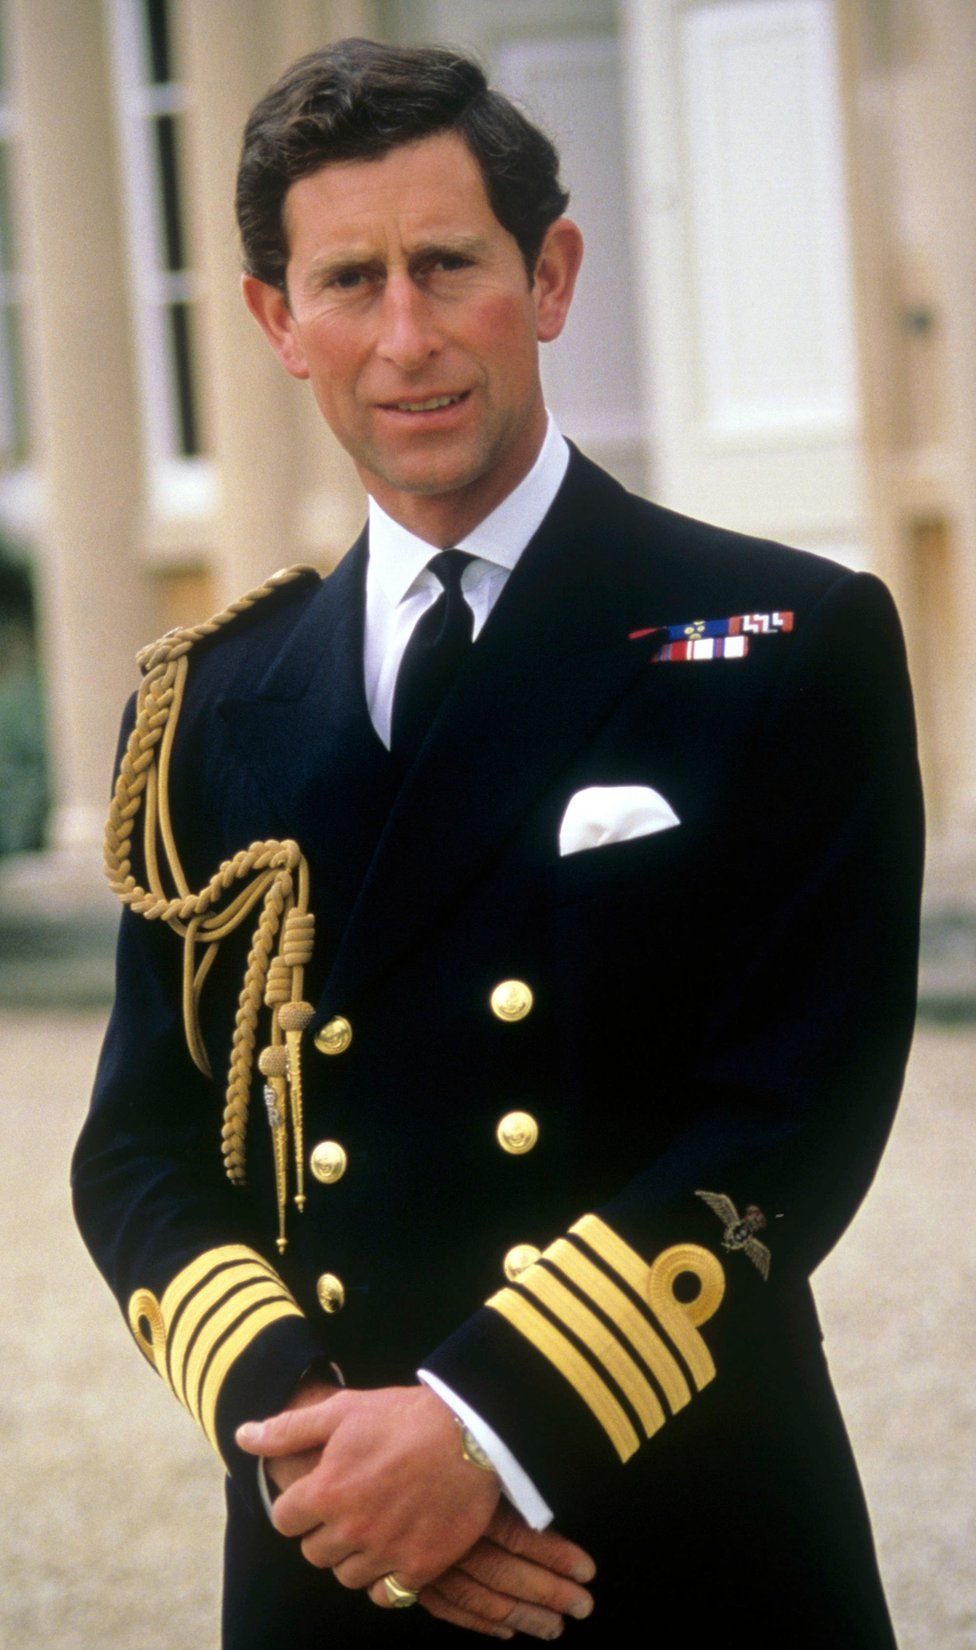 Prince of Wales wearing his new Royal Navy captain's uniform